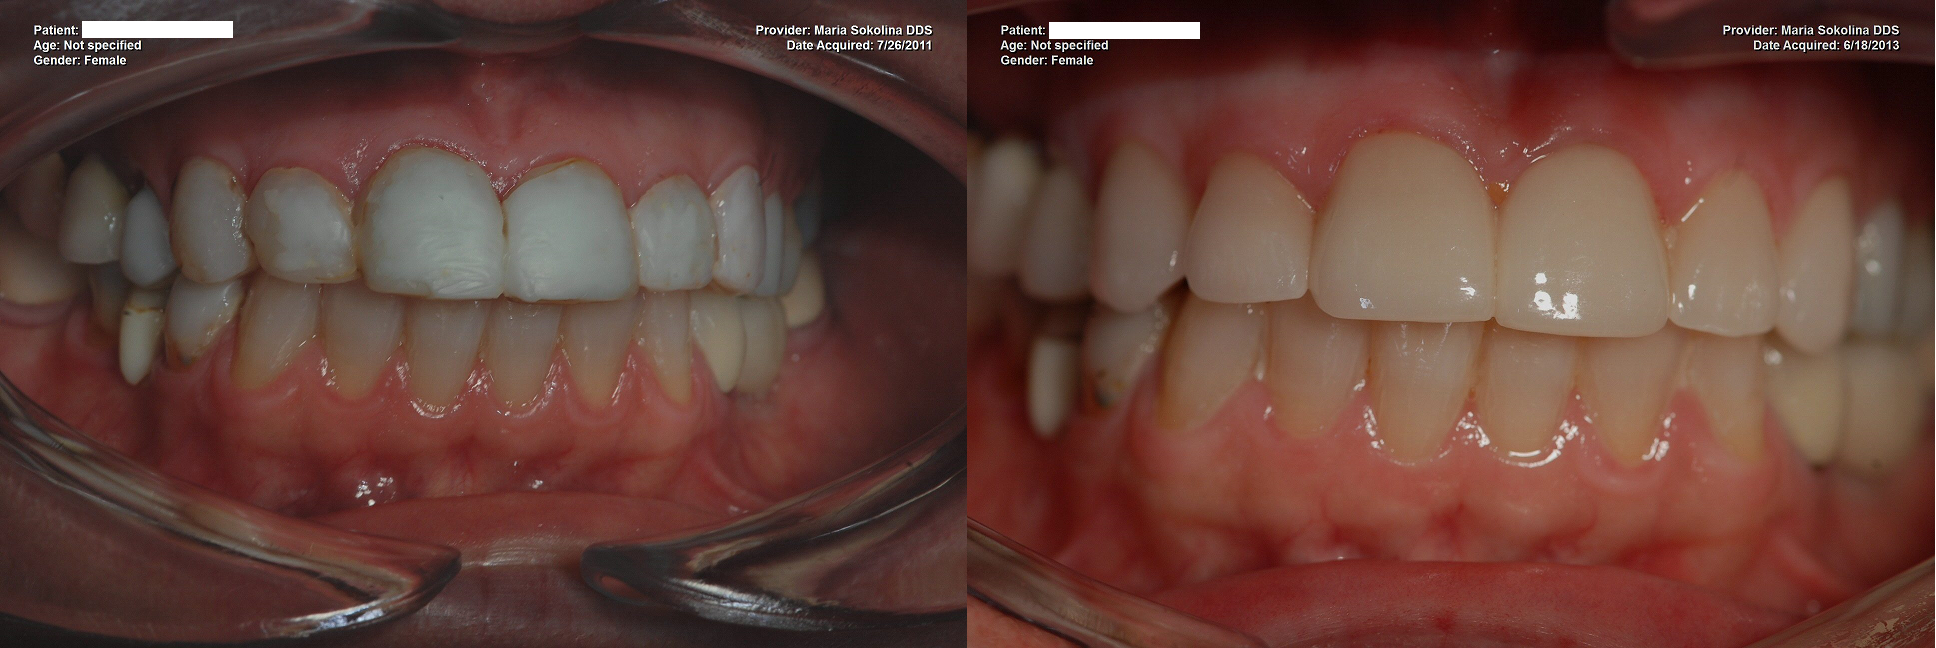 Replacement of composite bonding with porcelain veneers